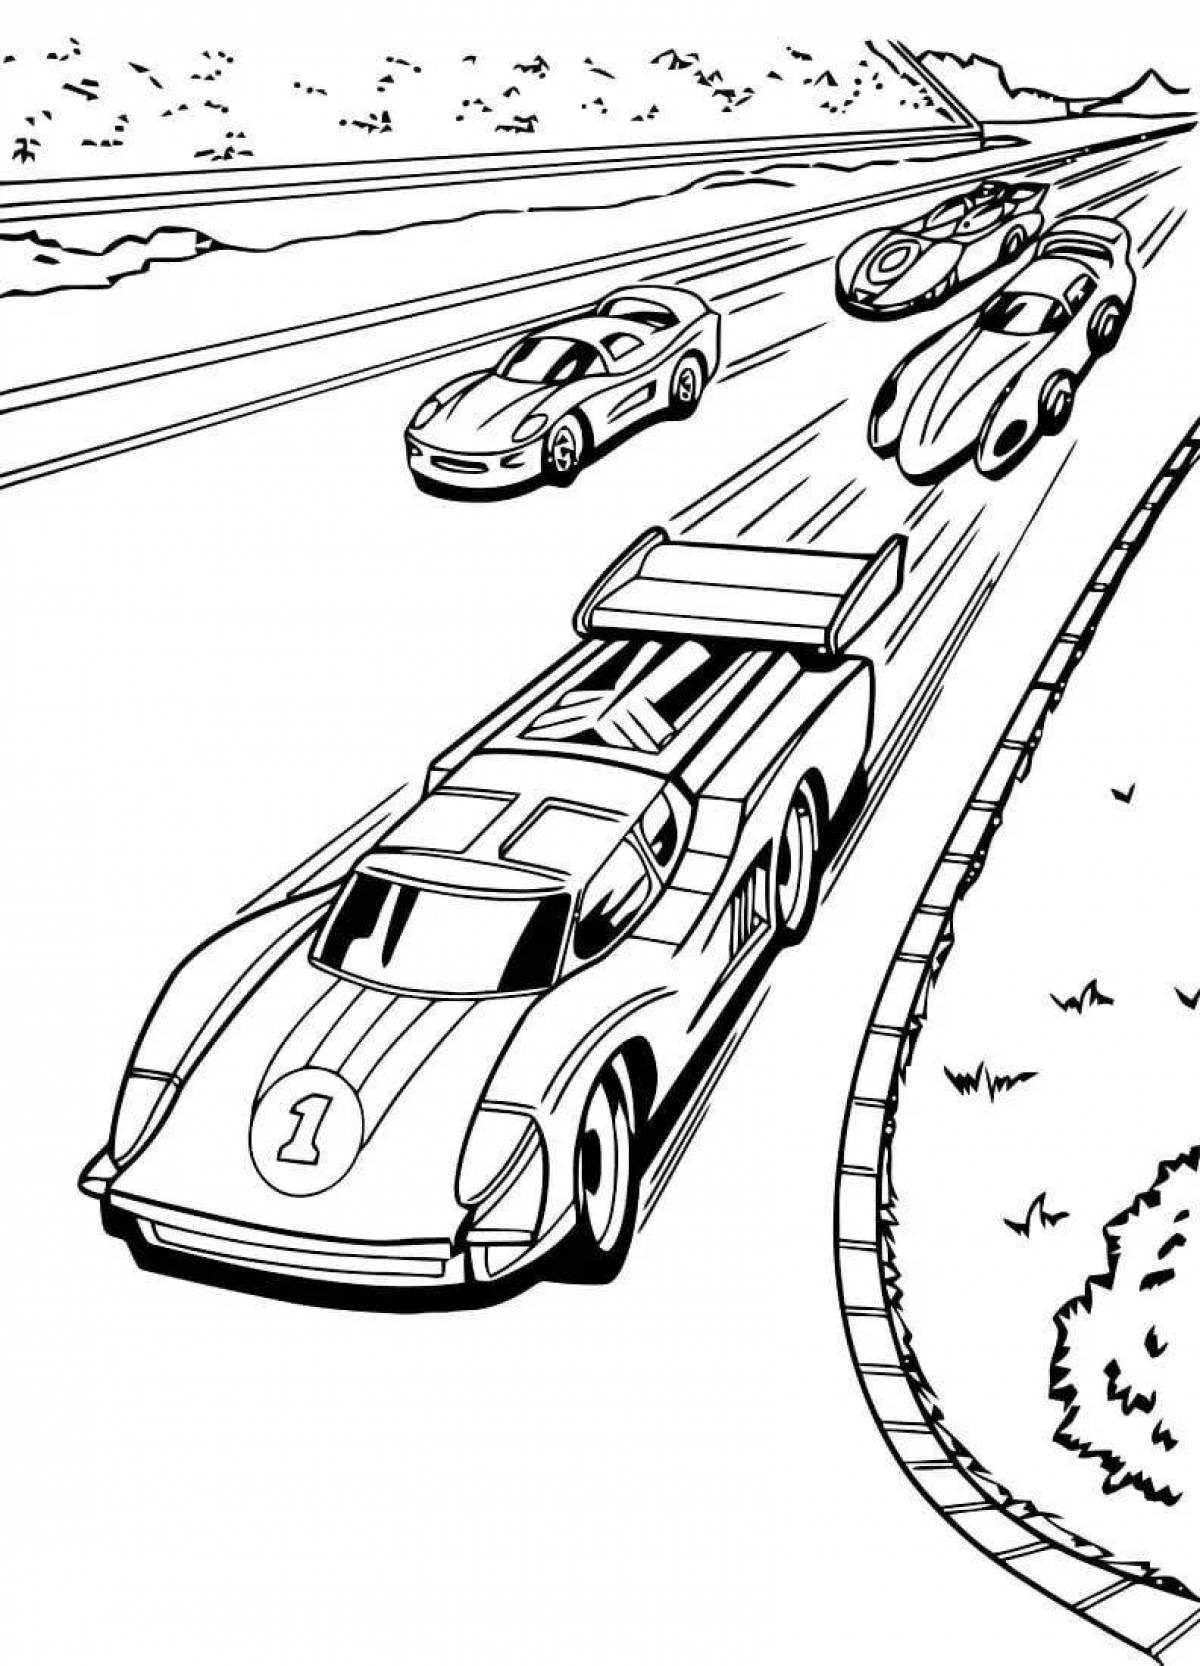 Fabulous racing car coloring pages for boys